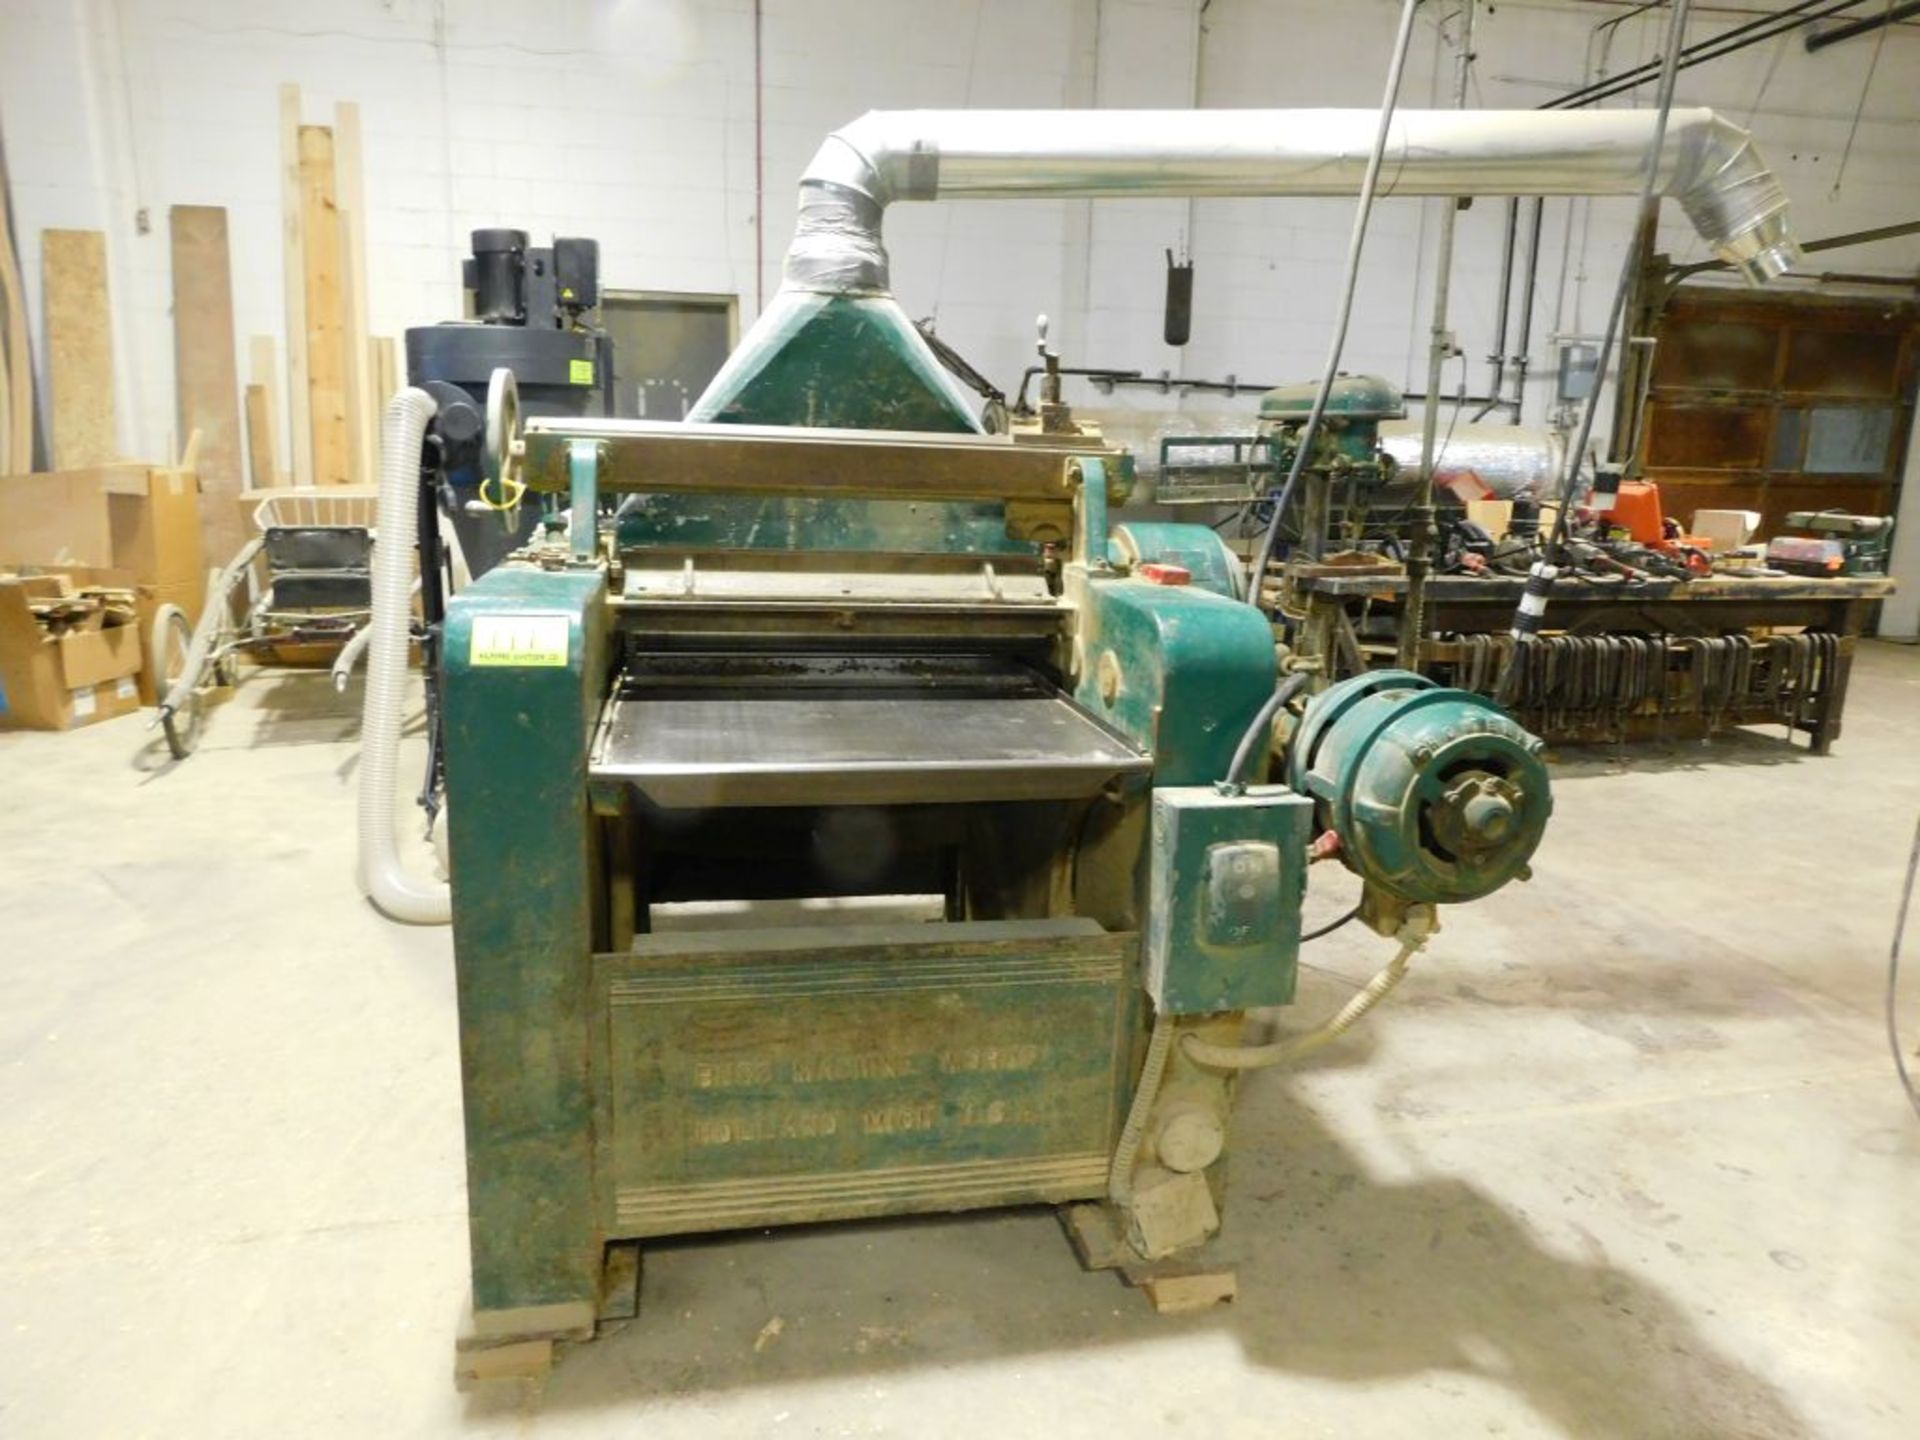 Buss planer, model M, sn 46129, size 30 x 8, 1 1/2 hp, 3 phase. - Image 2 of 2